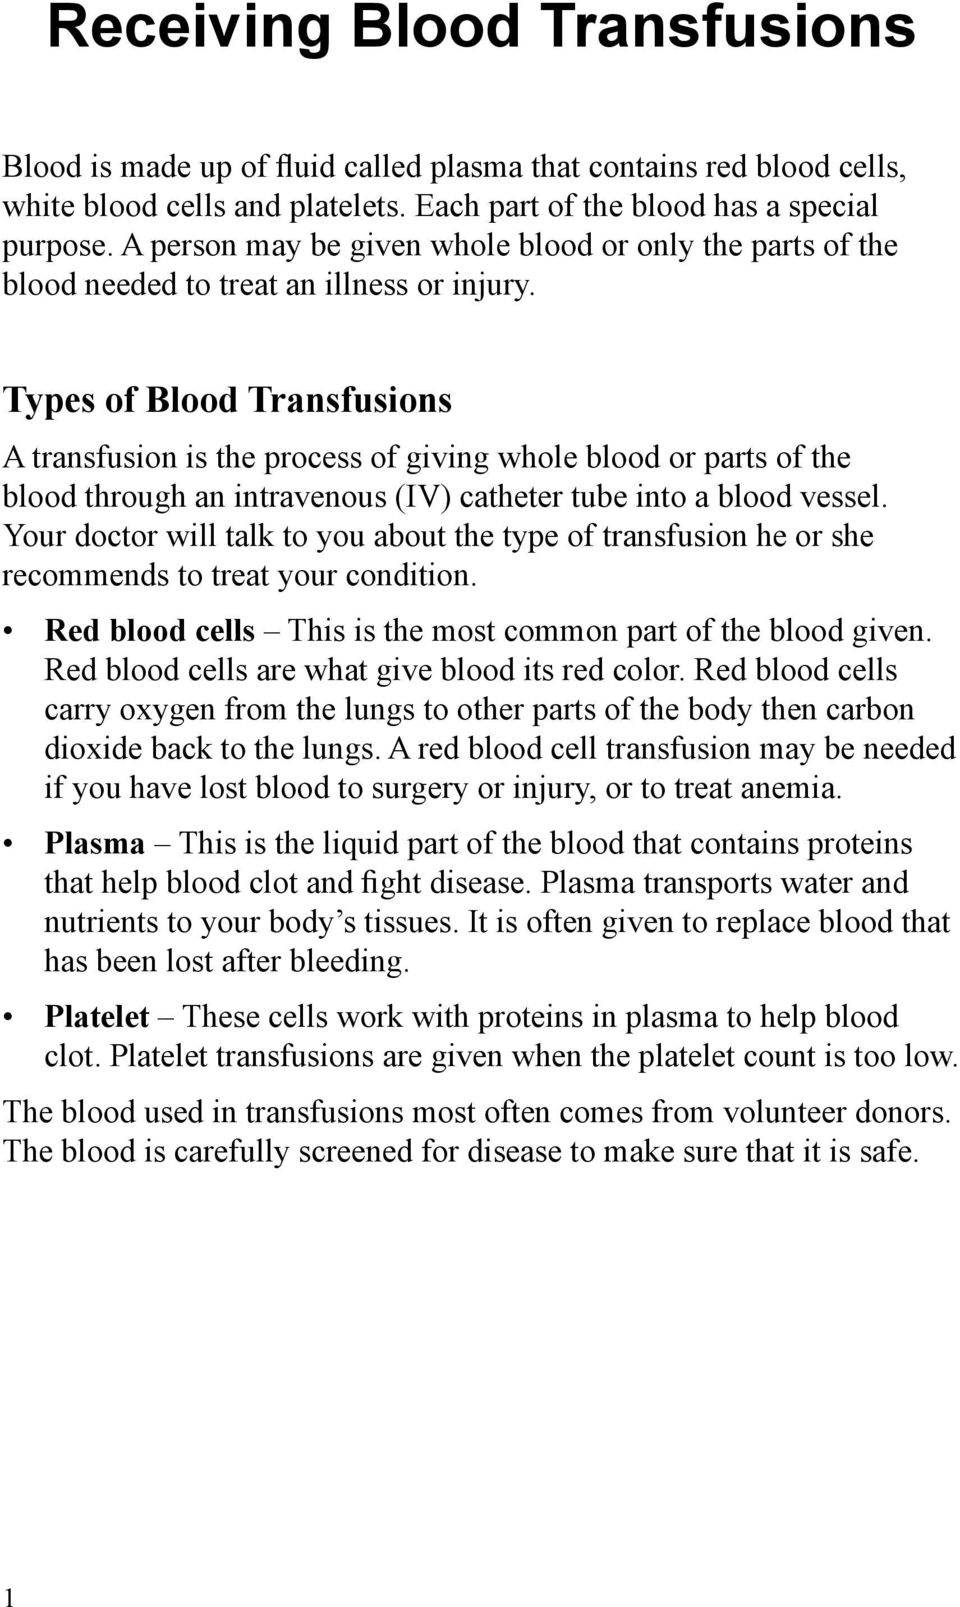 Types of Blood Transfusions A transfusion is the process of giving whole blood or parts of the blood through an intravenous (IV) catheter tube into a blood vessel.